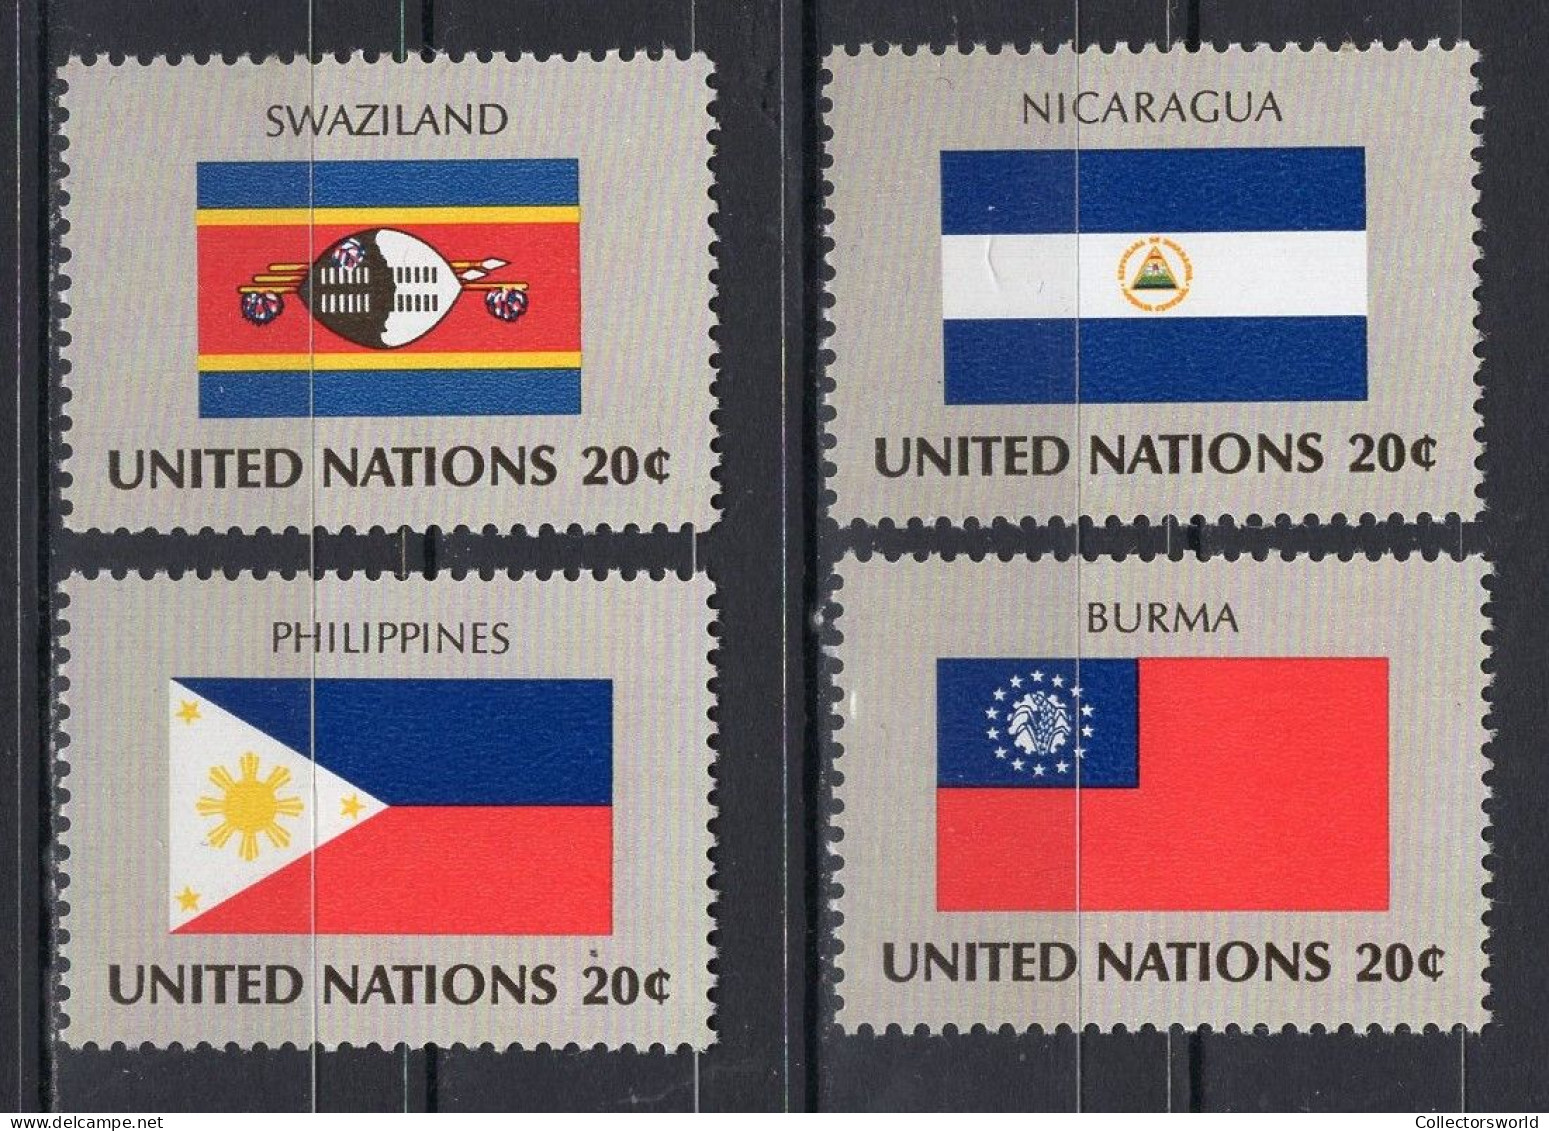 United Nations UN New York Serie 4v 1982 Flag Serie Philippines Swaziland Nicaragua MNH - Neufs